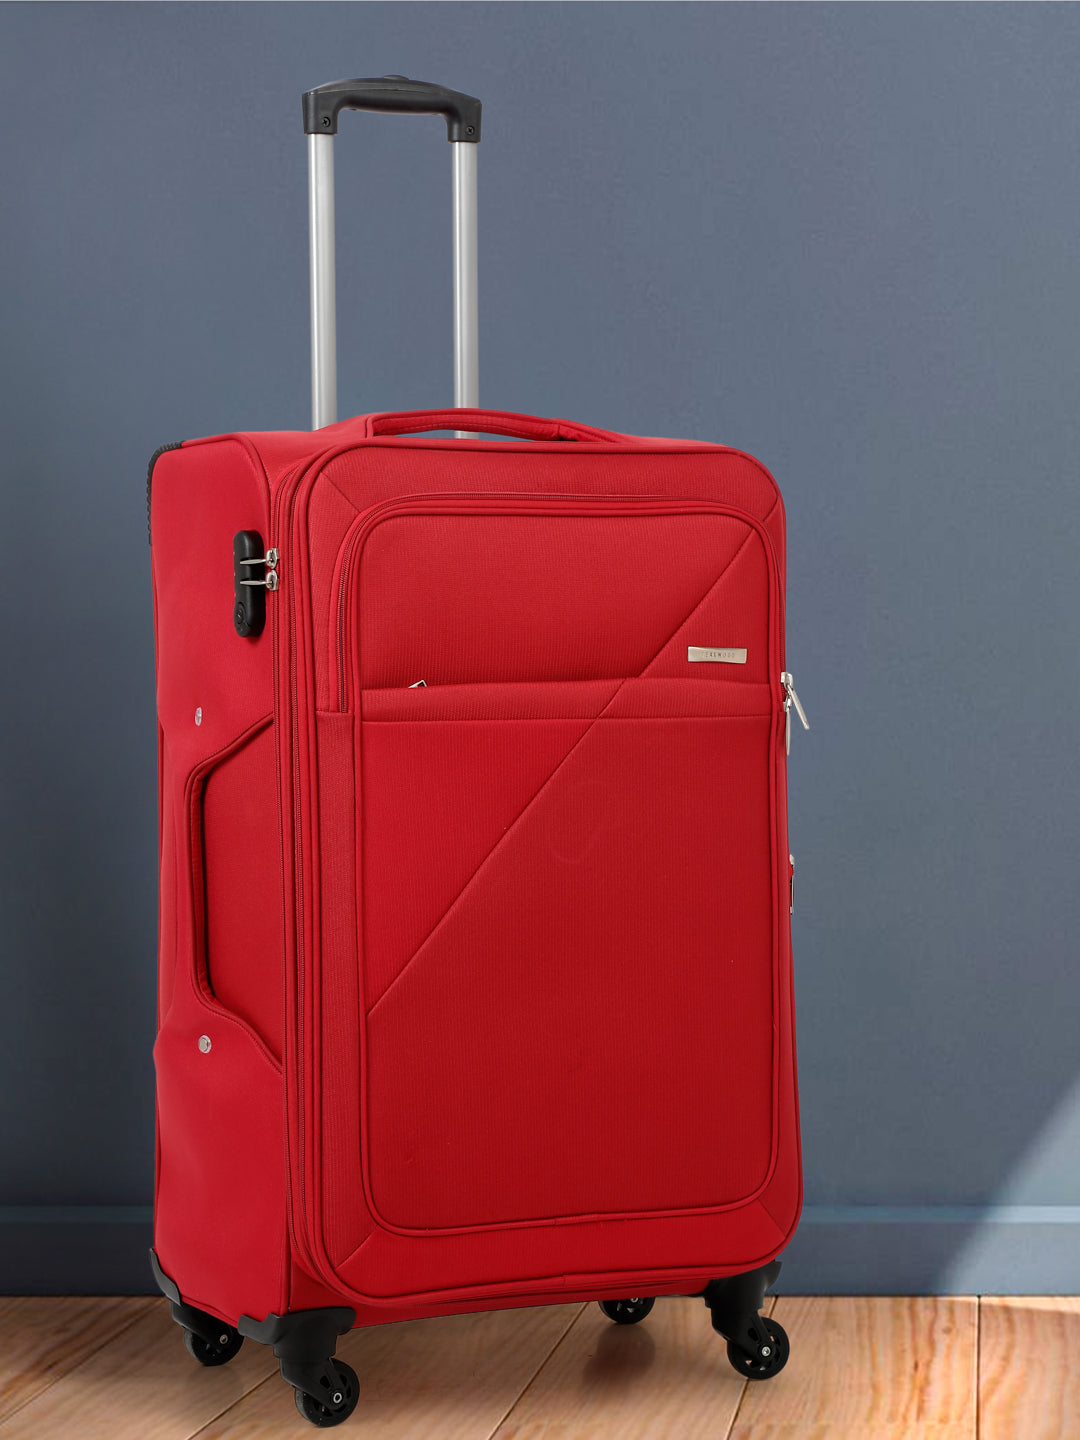 FLY Turbo 65 cms Soft Trolley Bag Check-in Suitcase 2 Wheels - 26 inch Red  - Price in India | Flipkart.com